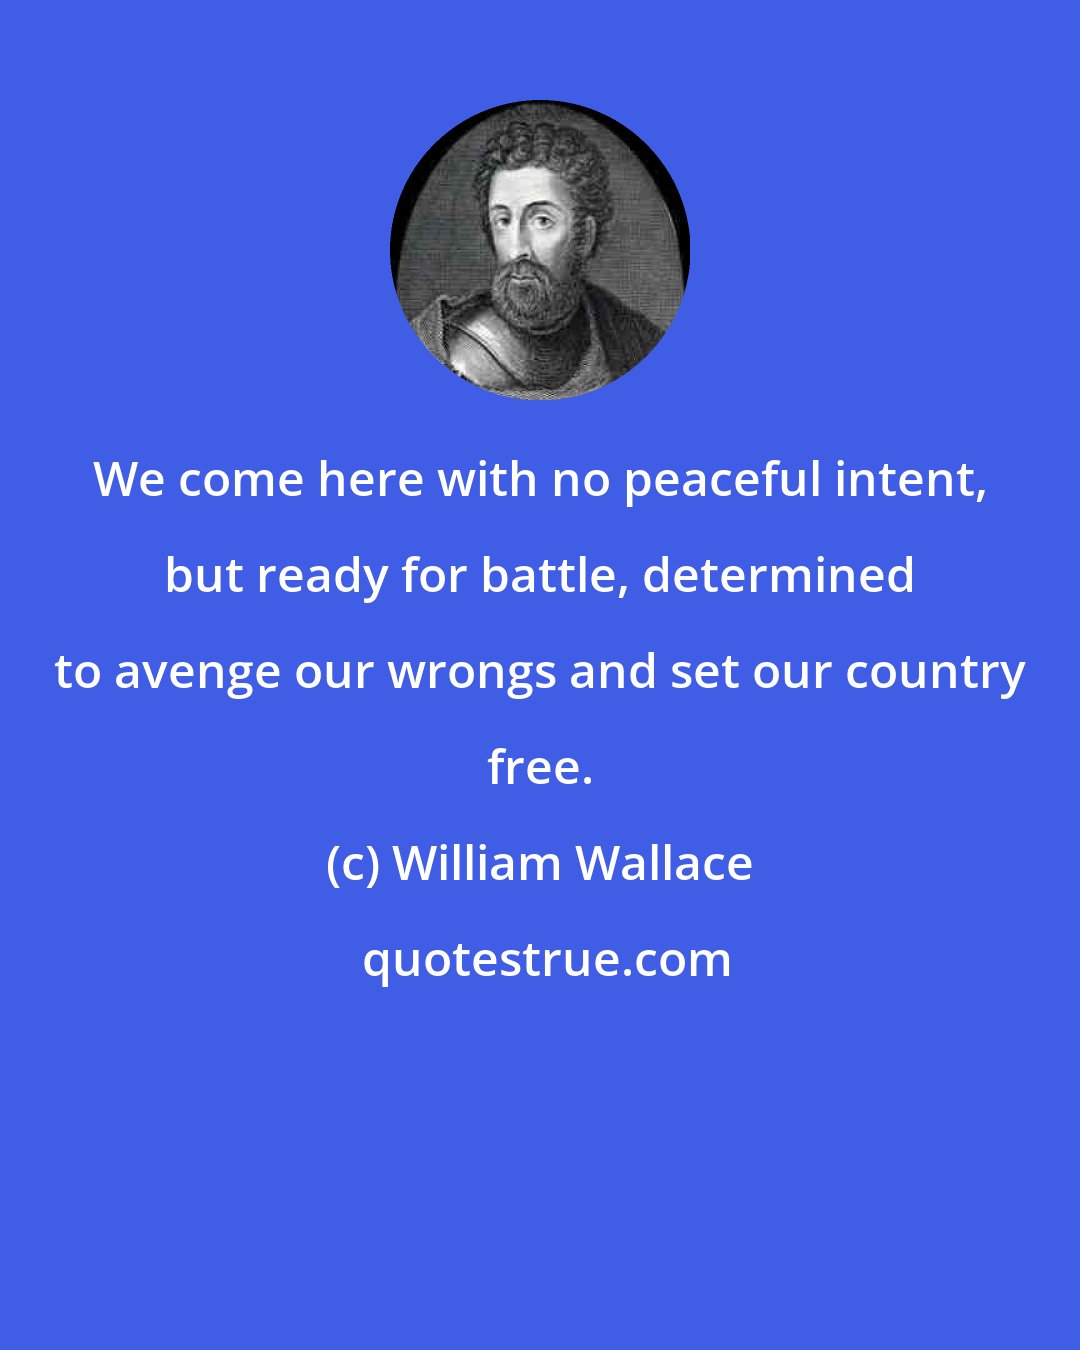 William Wallace: We come here with no peaceful intent, but ready for battle, determined to avenge our wrongs and set our country free.